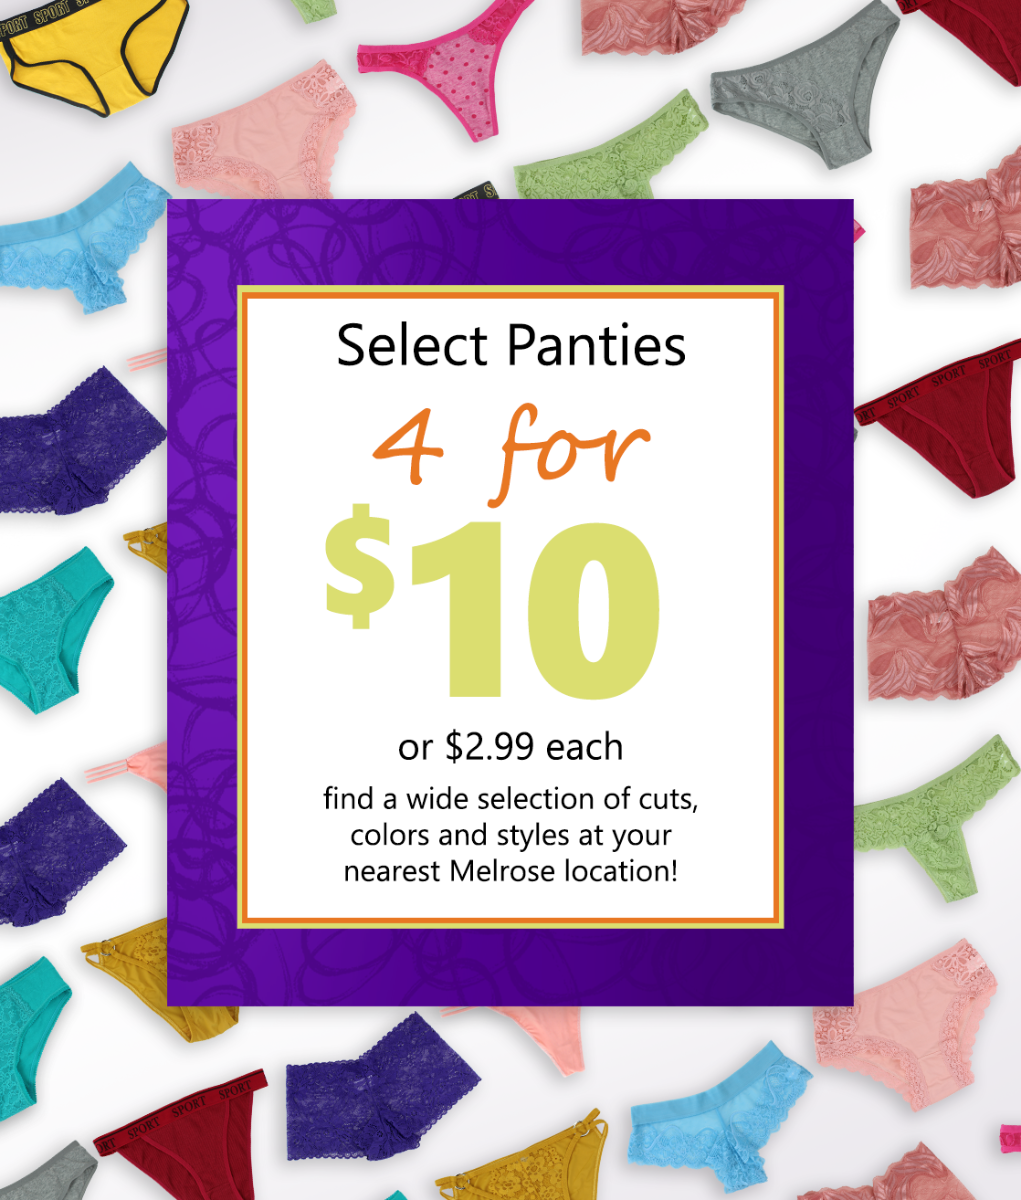 Select Panties 4 for $10 or $2.99 each. Find a wide selection of cuts, colors and styles at your nearest Melrose location!